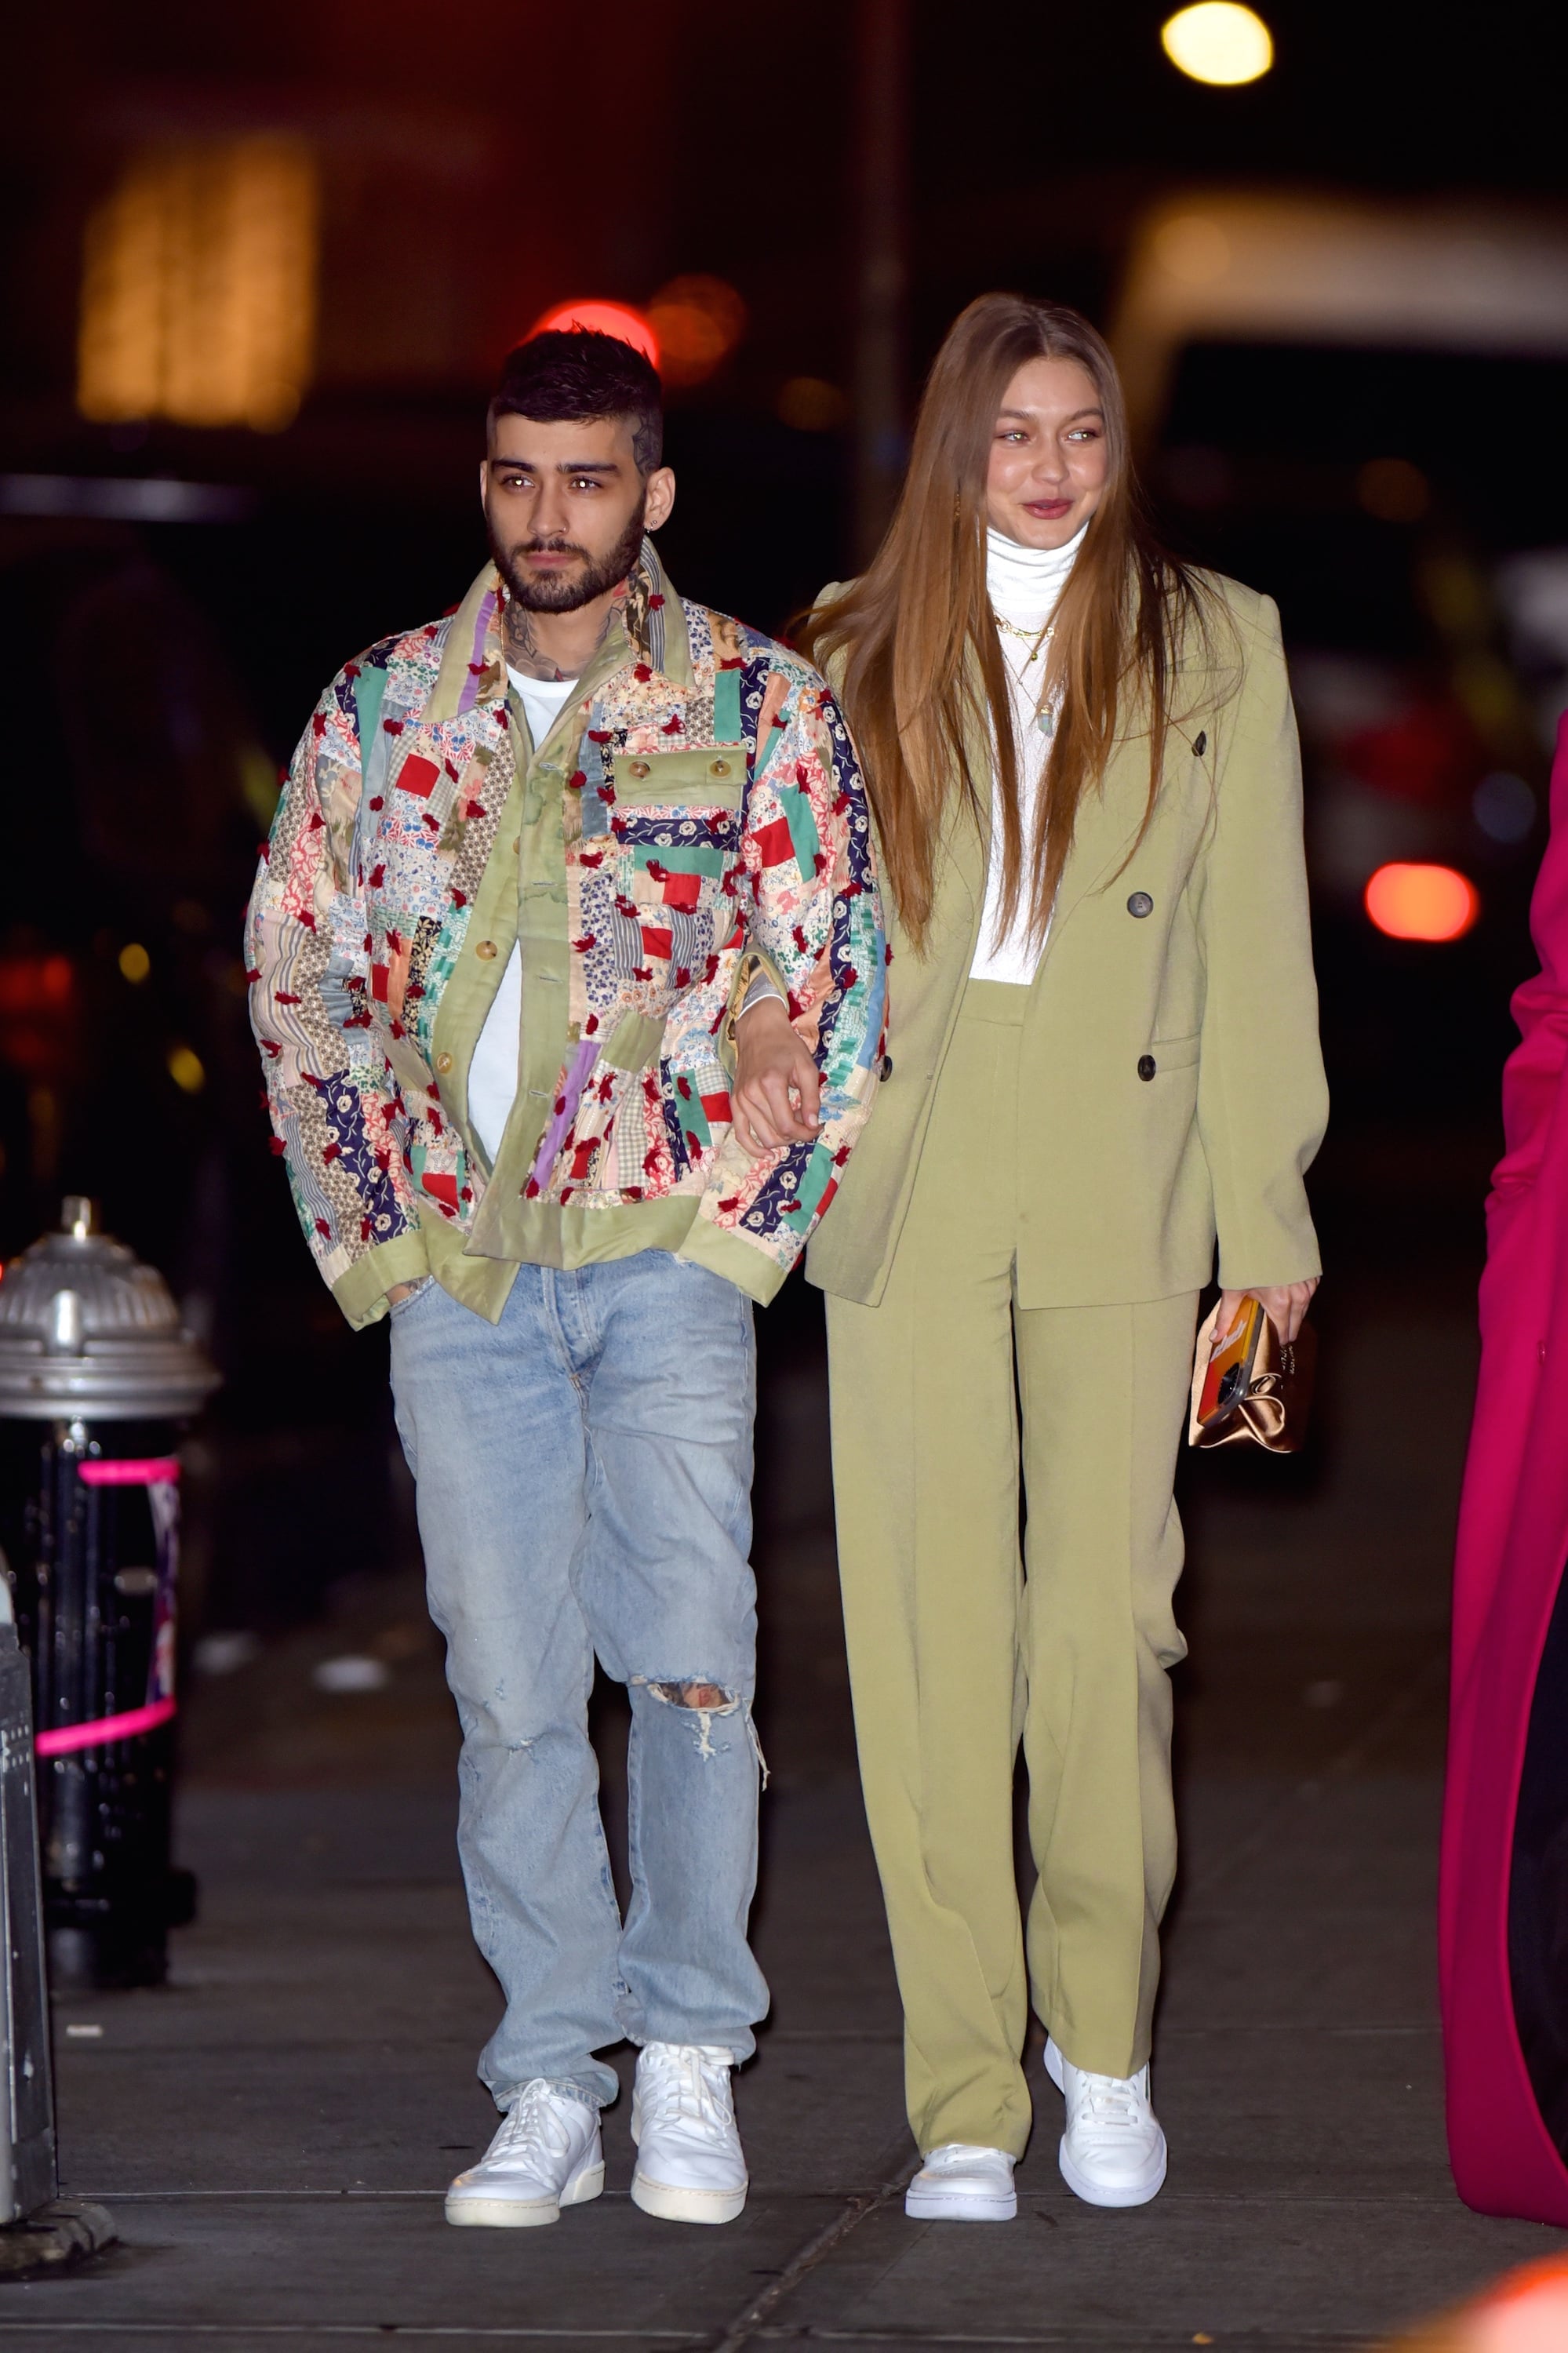 Style Leggings With a Cropped Sweatshirt Like Gigi Hadid, 27 Stylish and  Comfortable Outfit Ideas For POPSUGAR Play/Ground